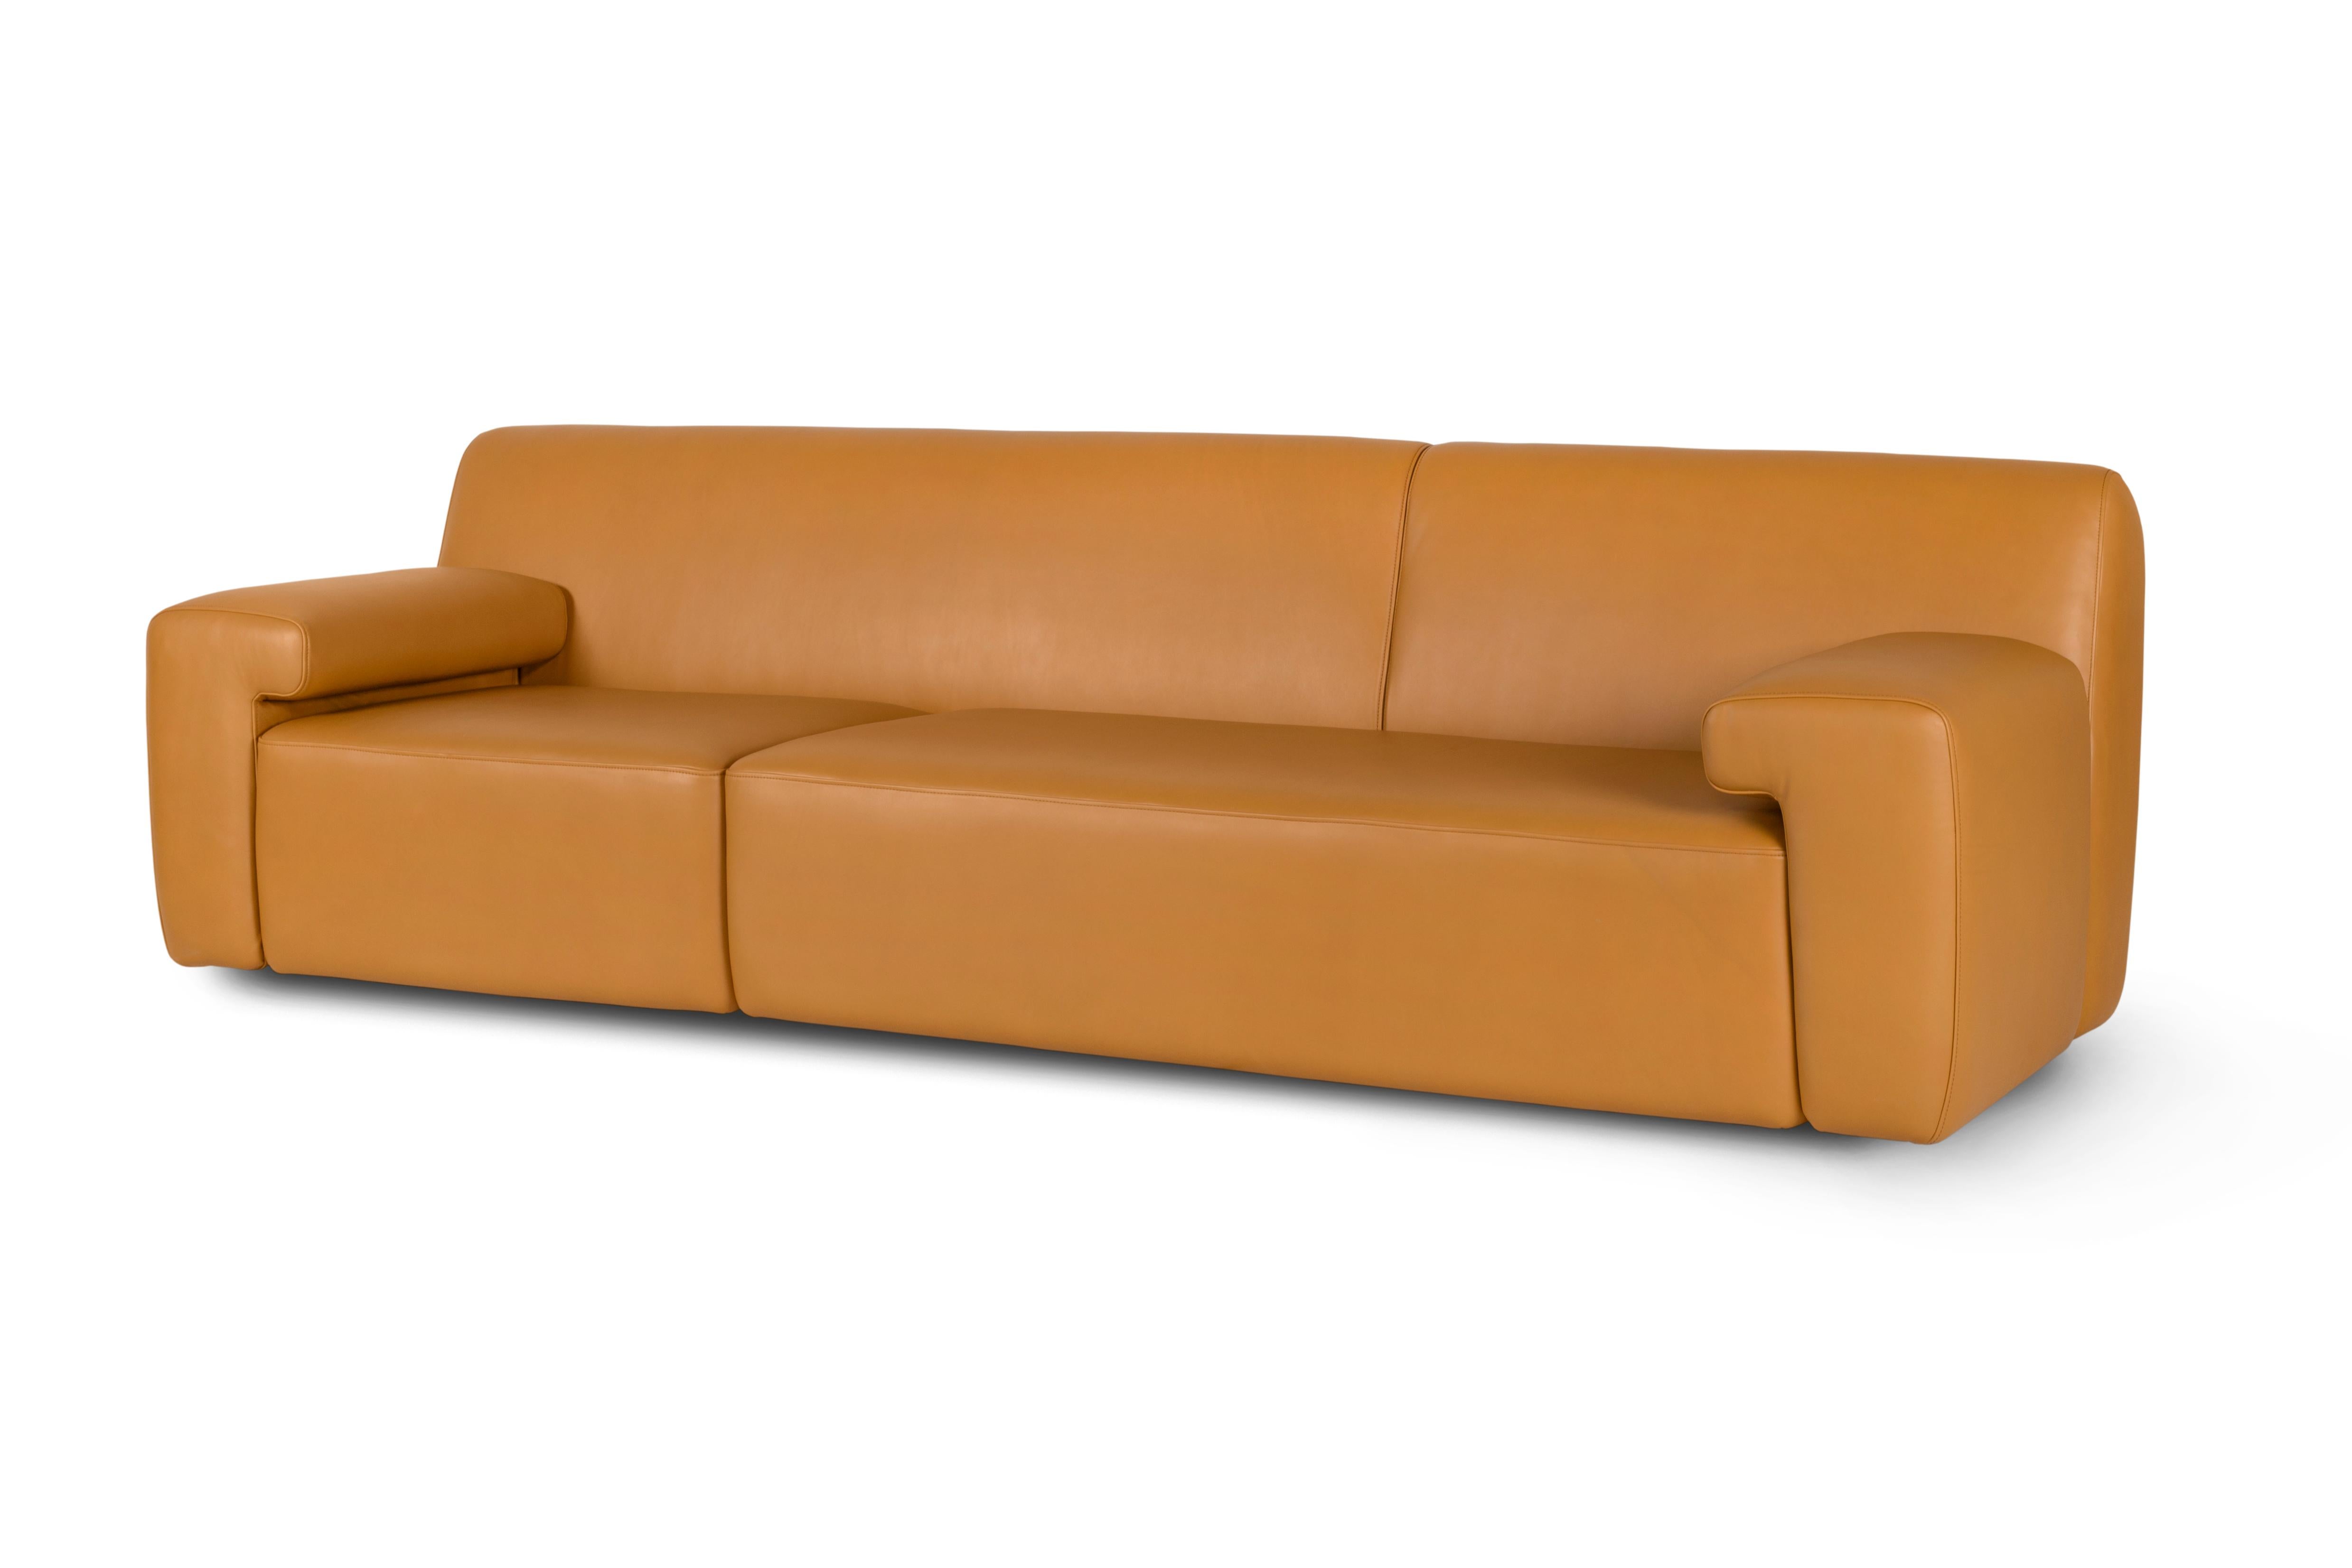 Brass Modern Almourol Sofa, Light Blue Leather, Handmade in Portugal by Greenapple For Sale